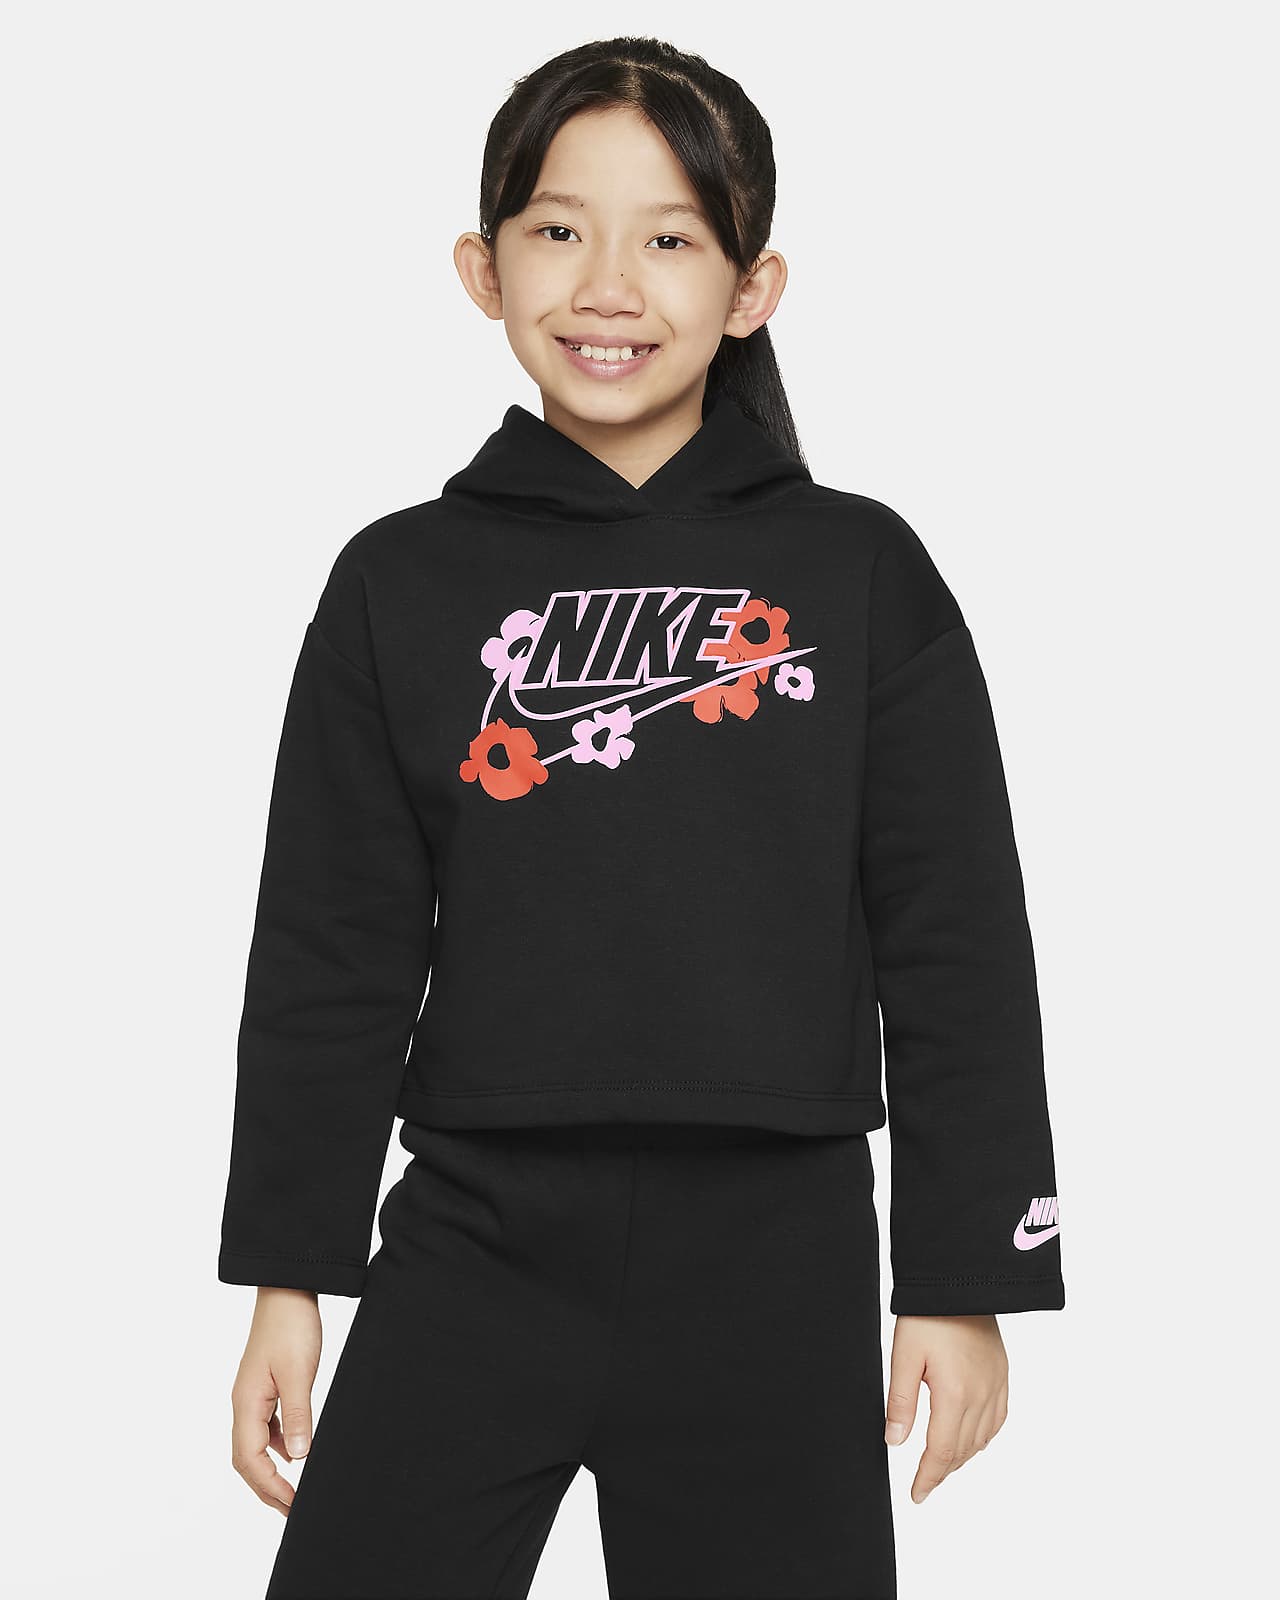 Nike Floral Fleece Younger Kids' Graphic Hoodie